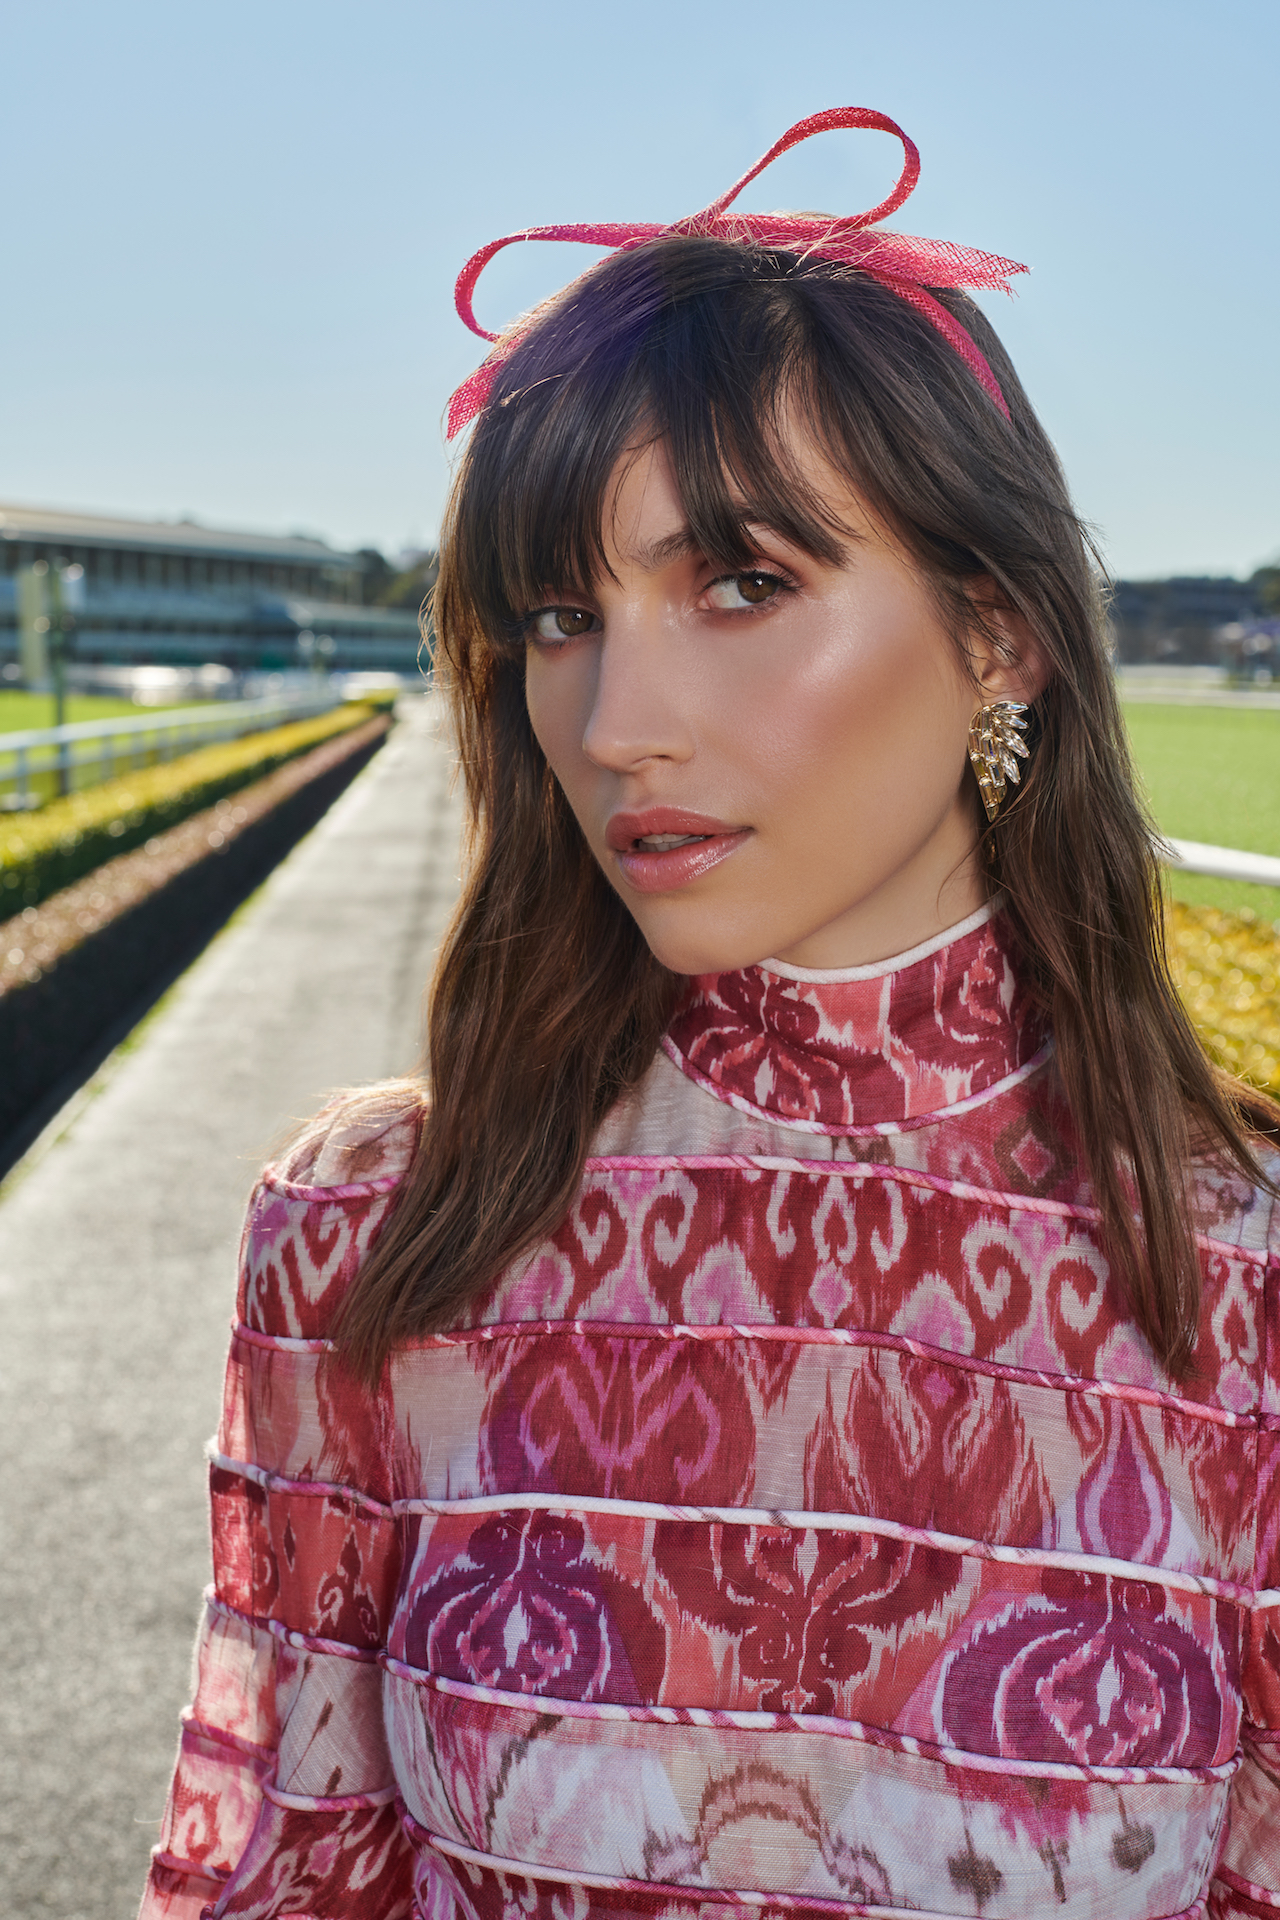 moet and chandon stakes day